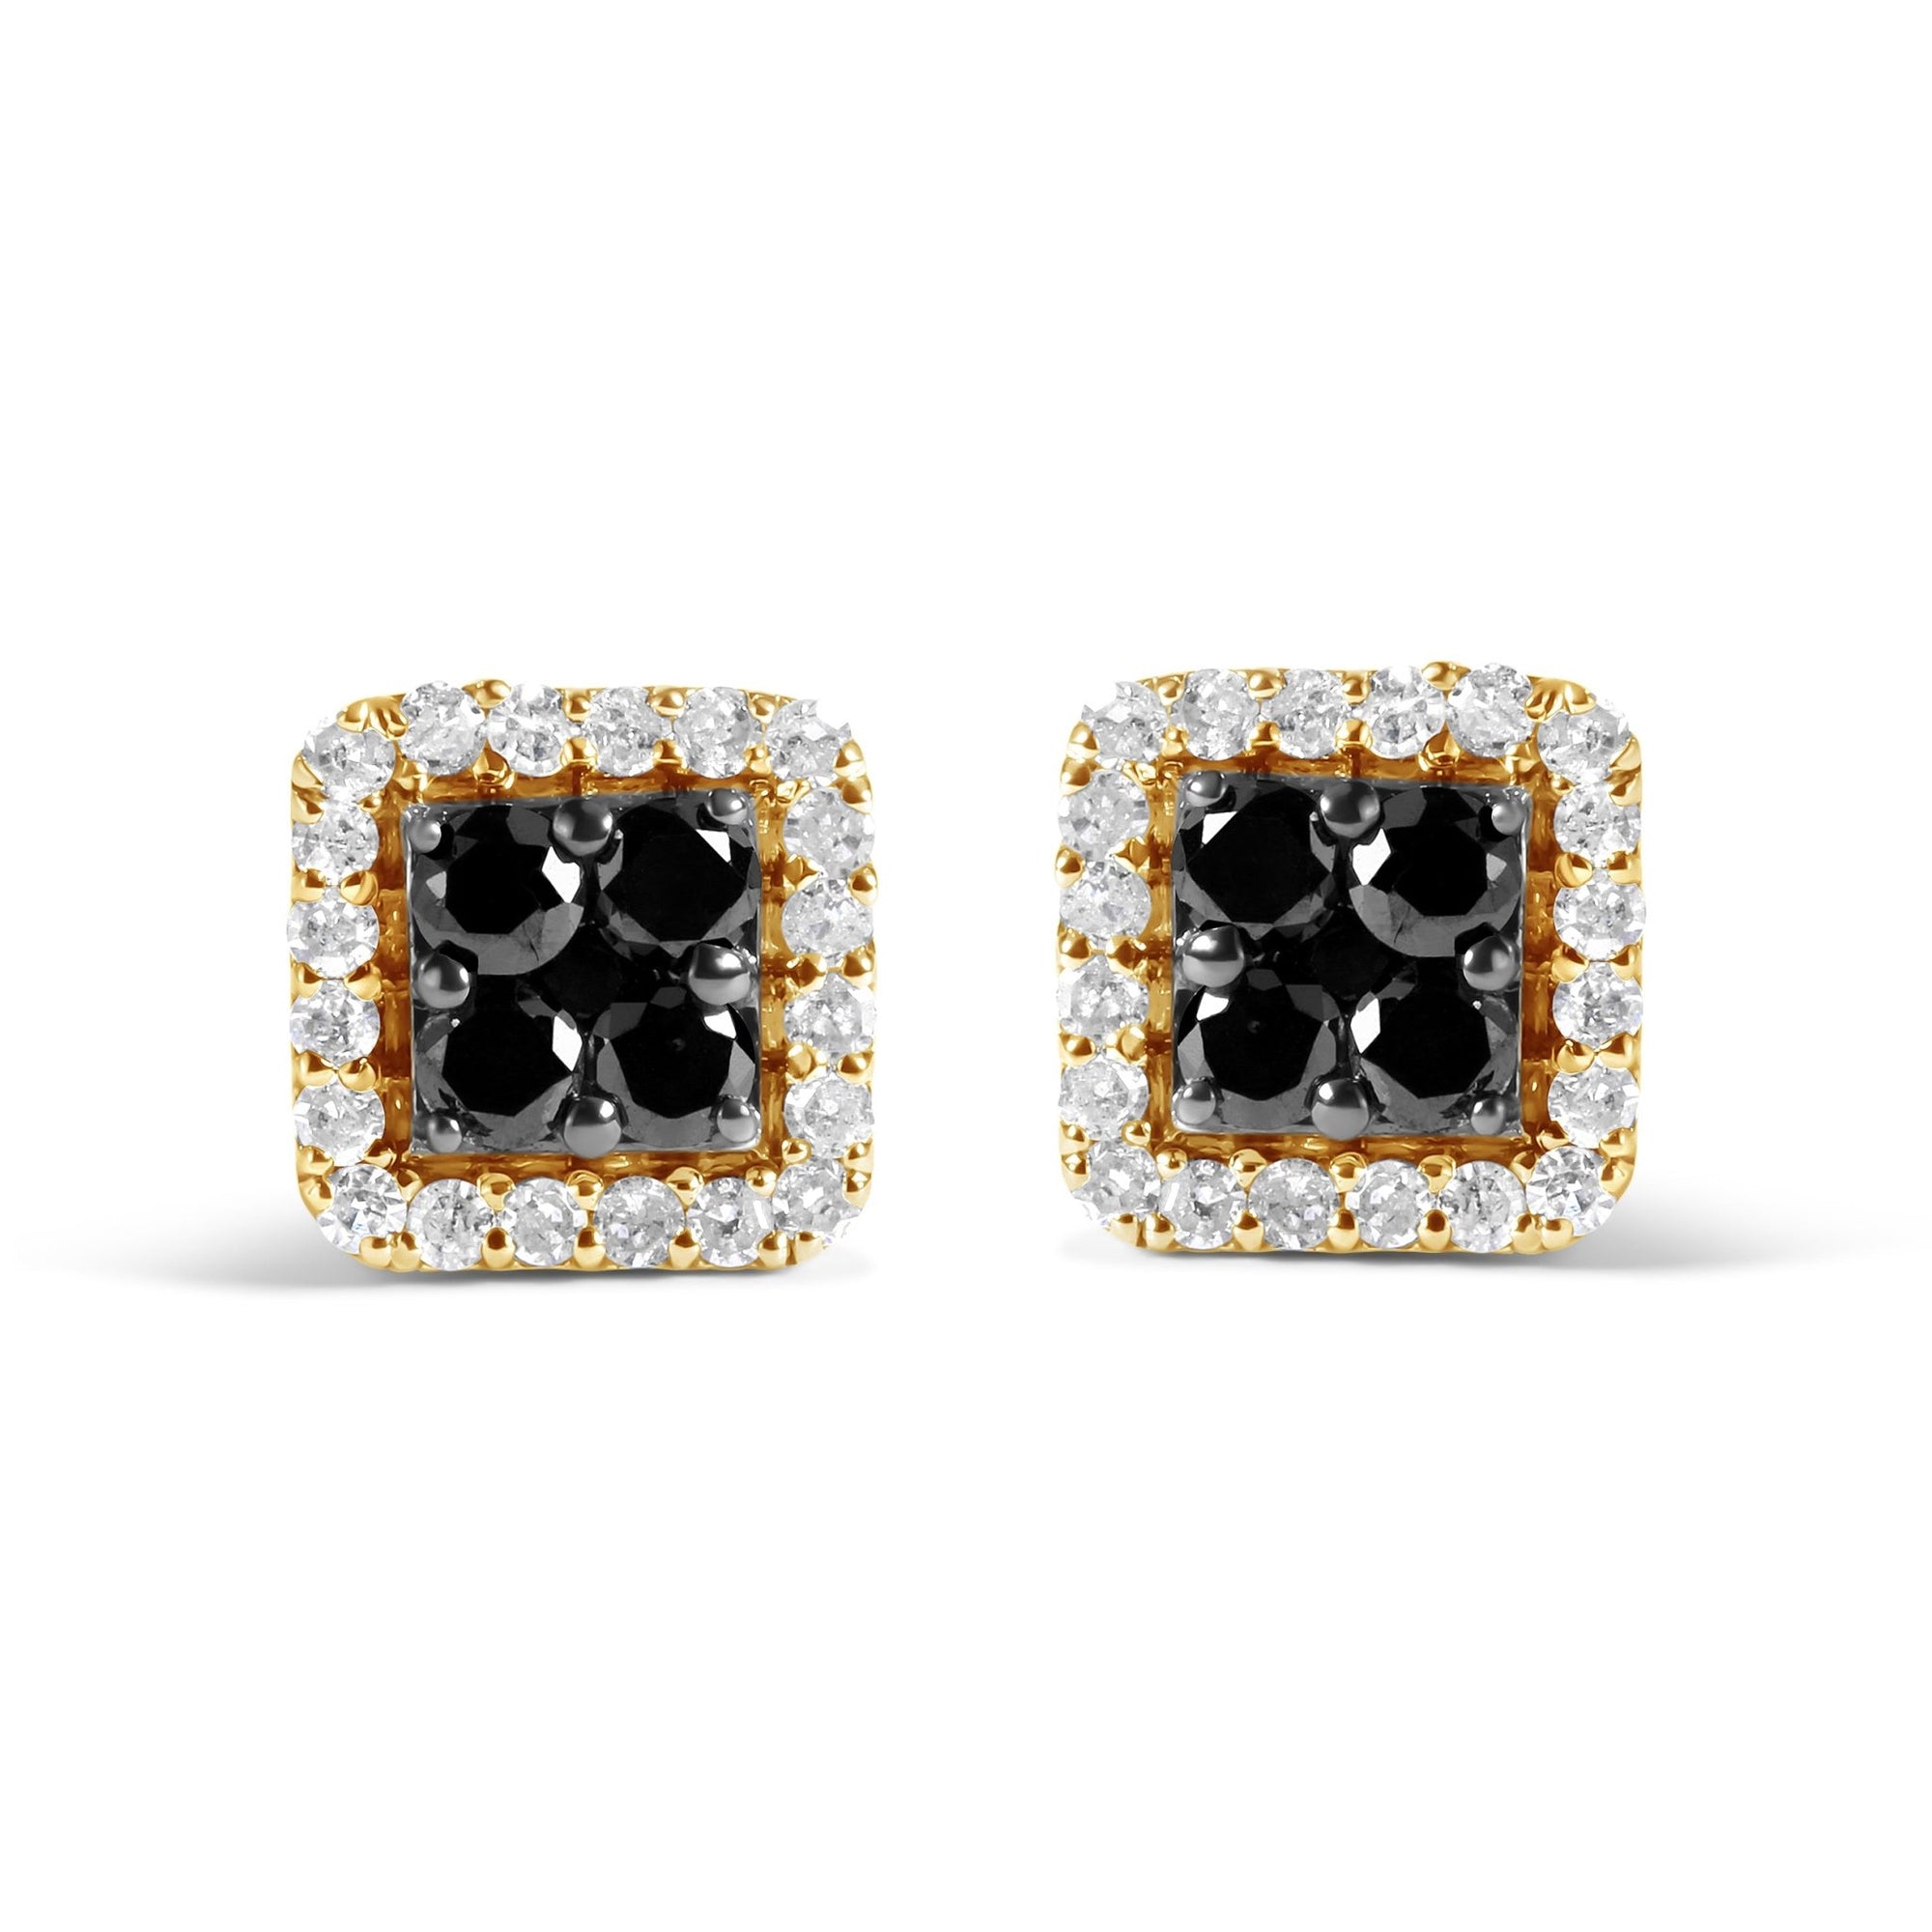 Men's 10K Yellow Gold 5/8 Cttw White and Black Treated Diamond Composite with Halo Stud Earring (Black / I-J, I2-I3 Clarity) - LinkagejewelrydesignLinkagejewelrydesign